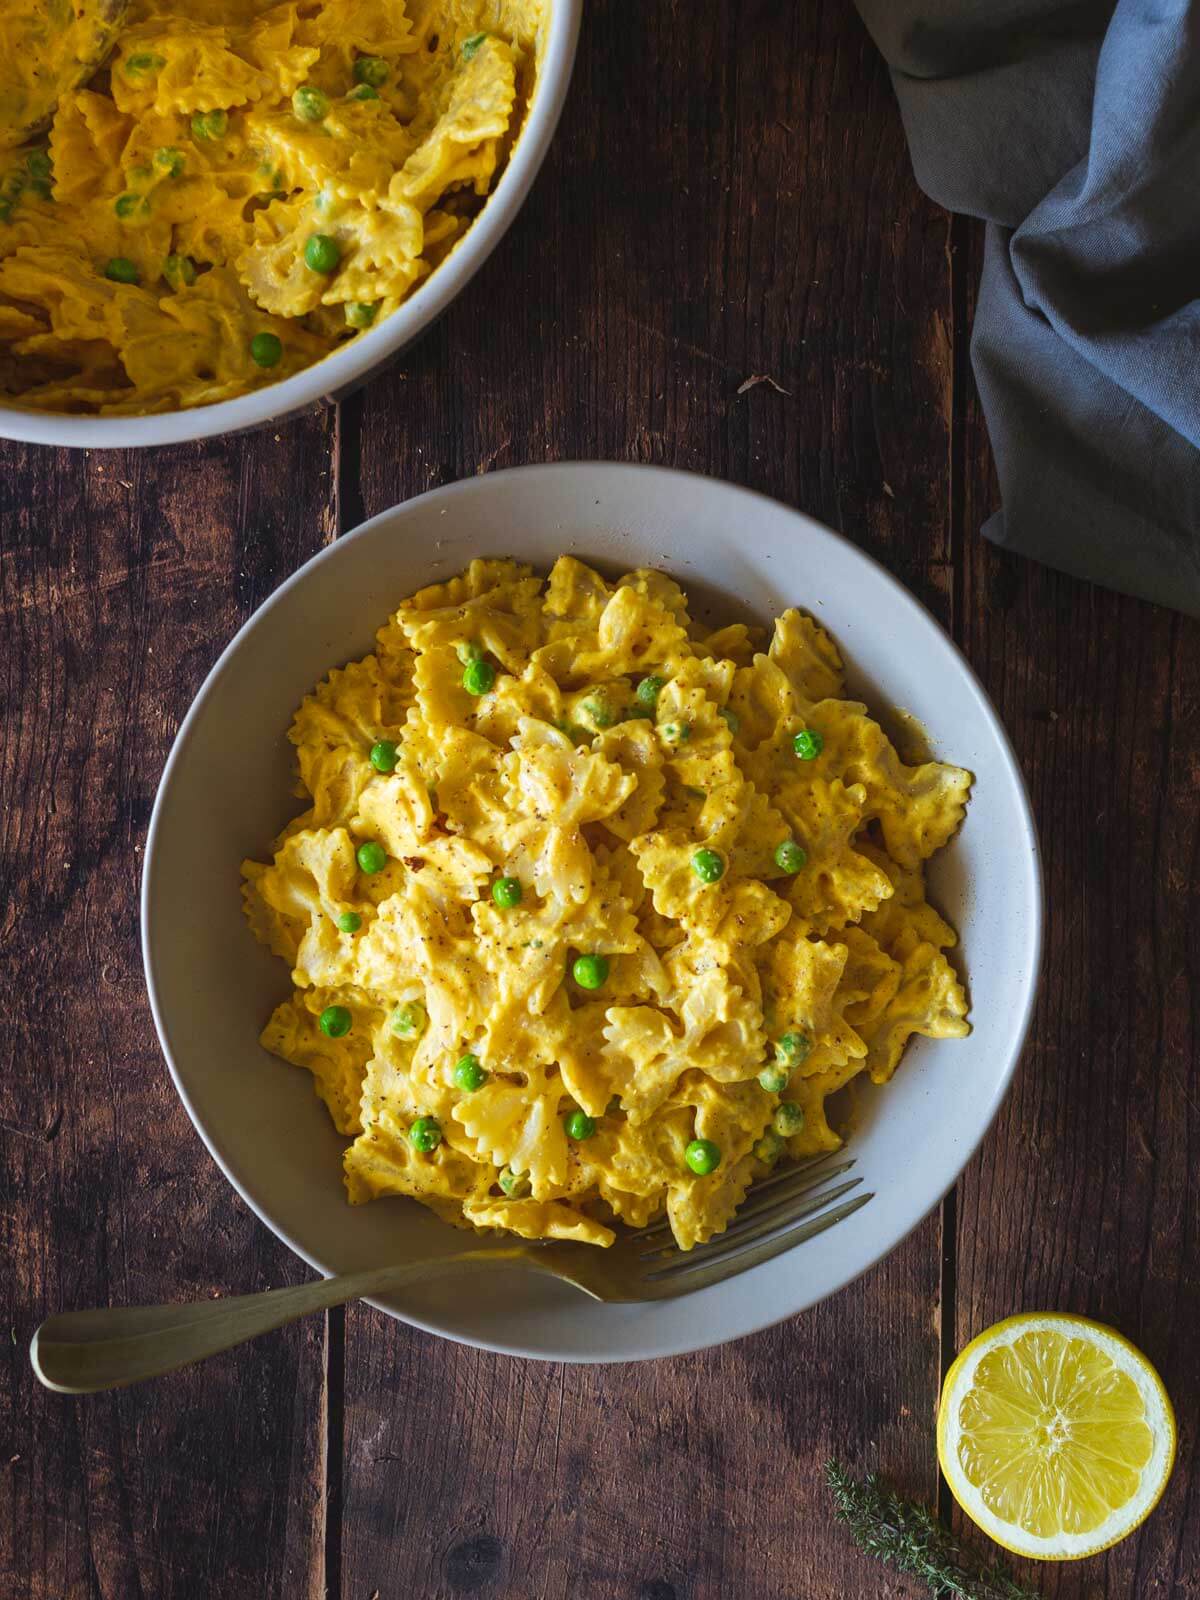 serve the roasted butternut squash pasta in bowls